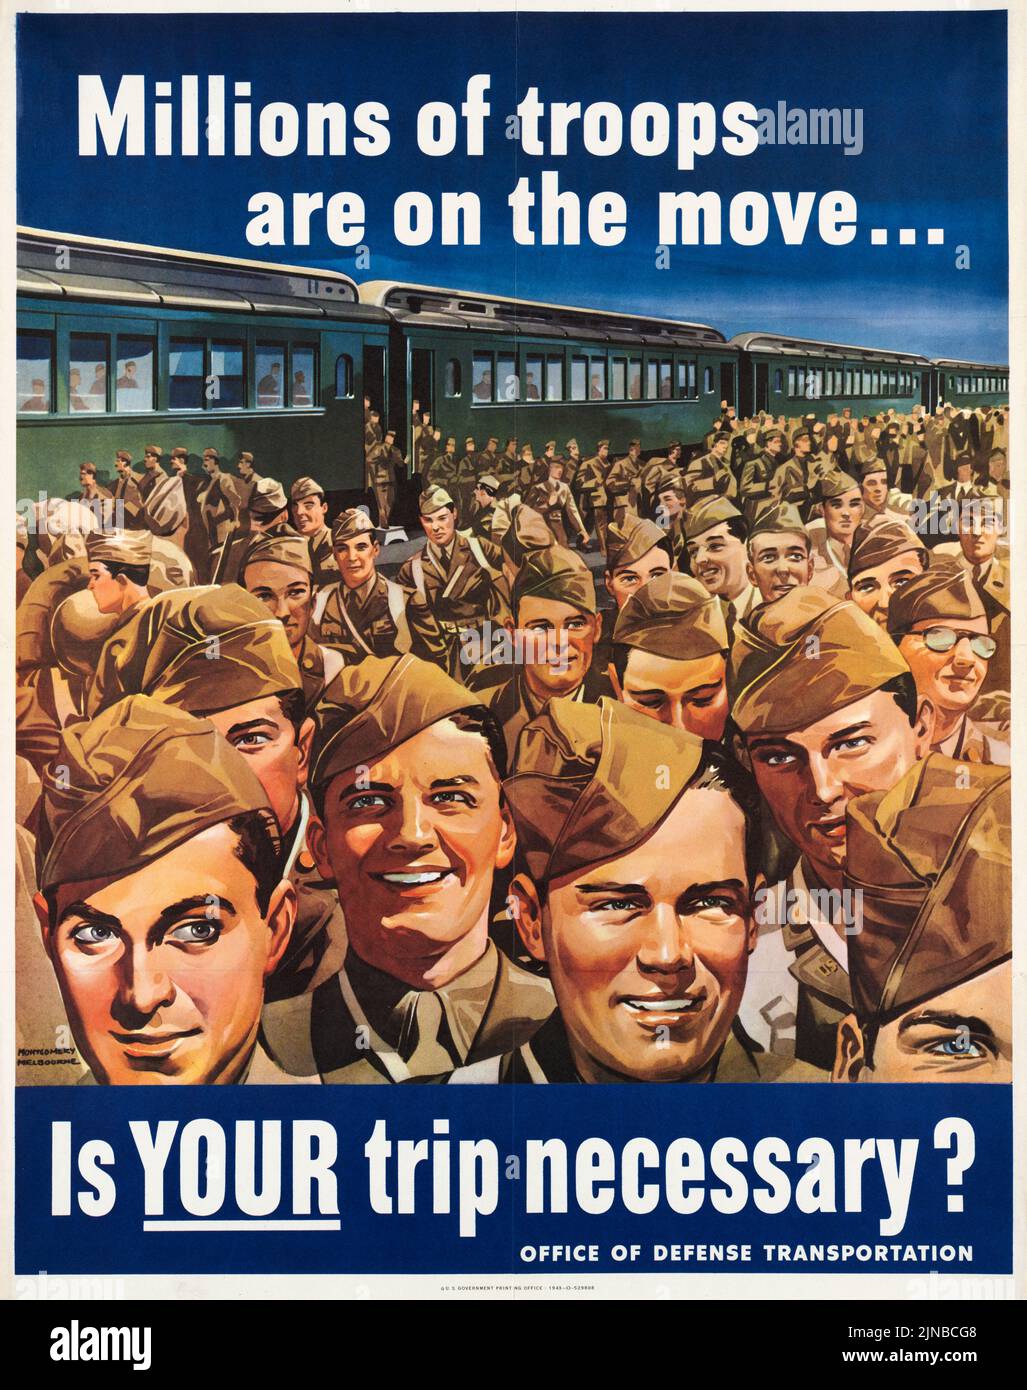 Millions of troops are on the move, is your trip necessary? Office of Defense Transportation (1943) American World War II era poster by Montgomery Melbourne Stock Photo